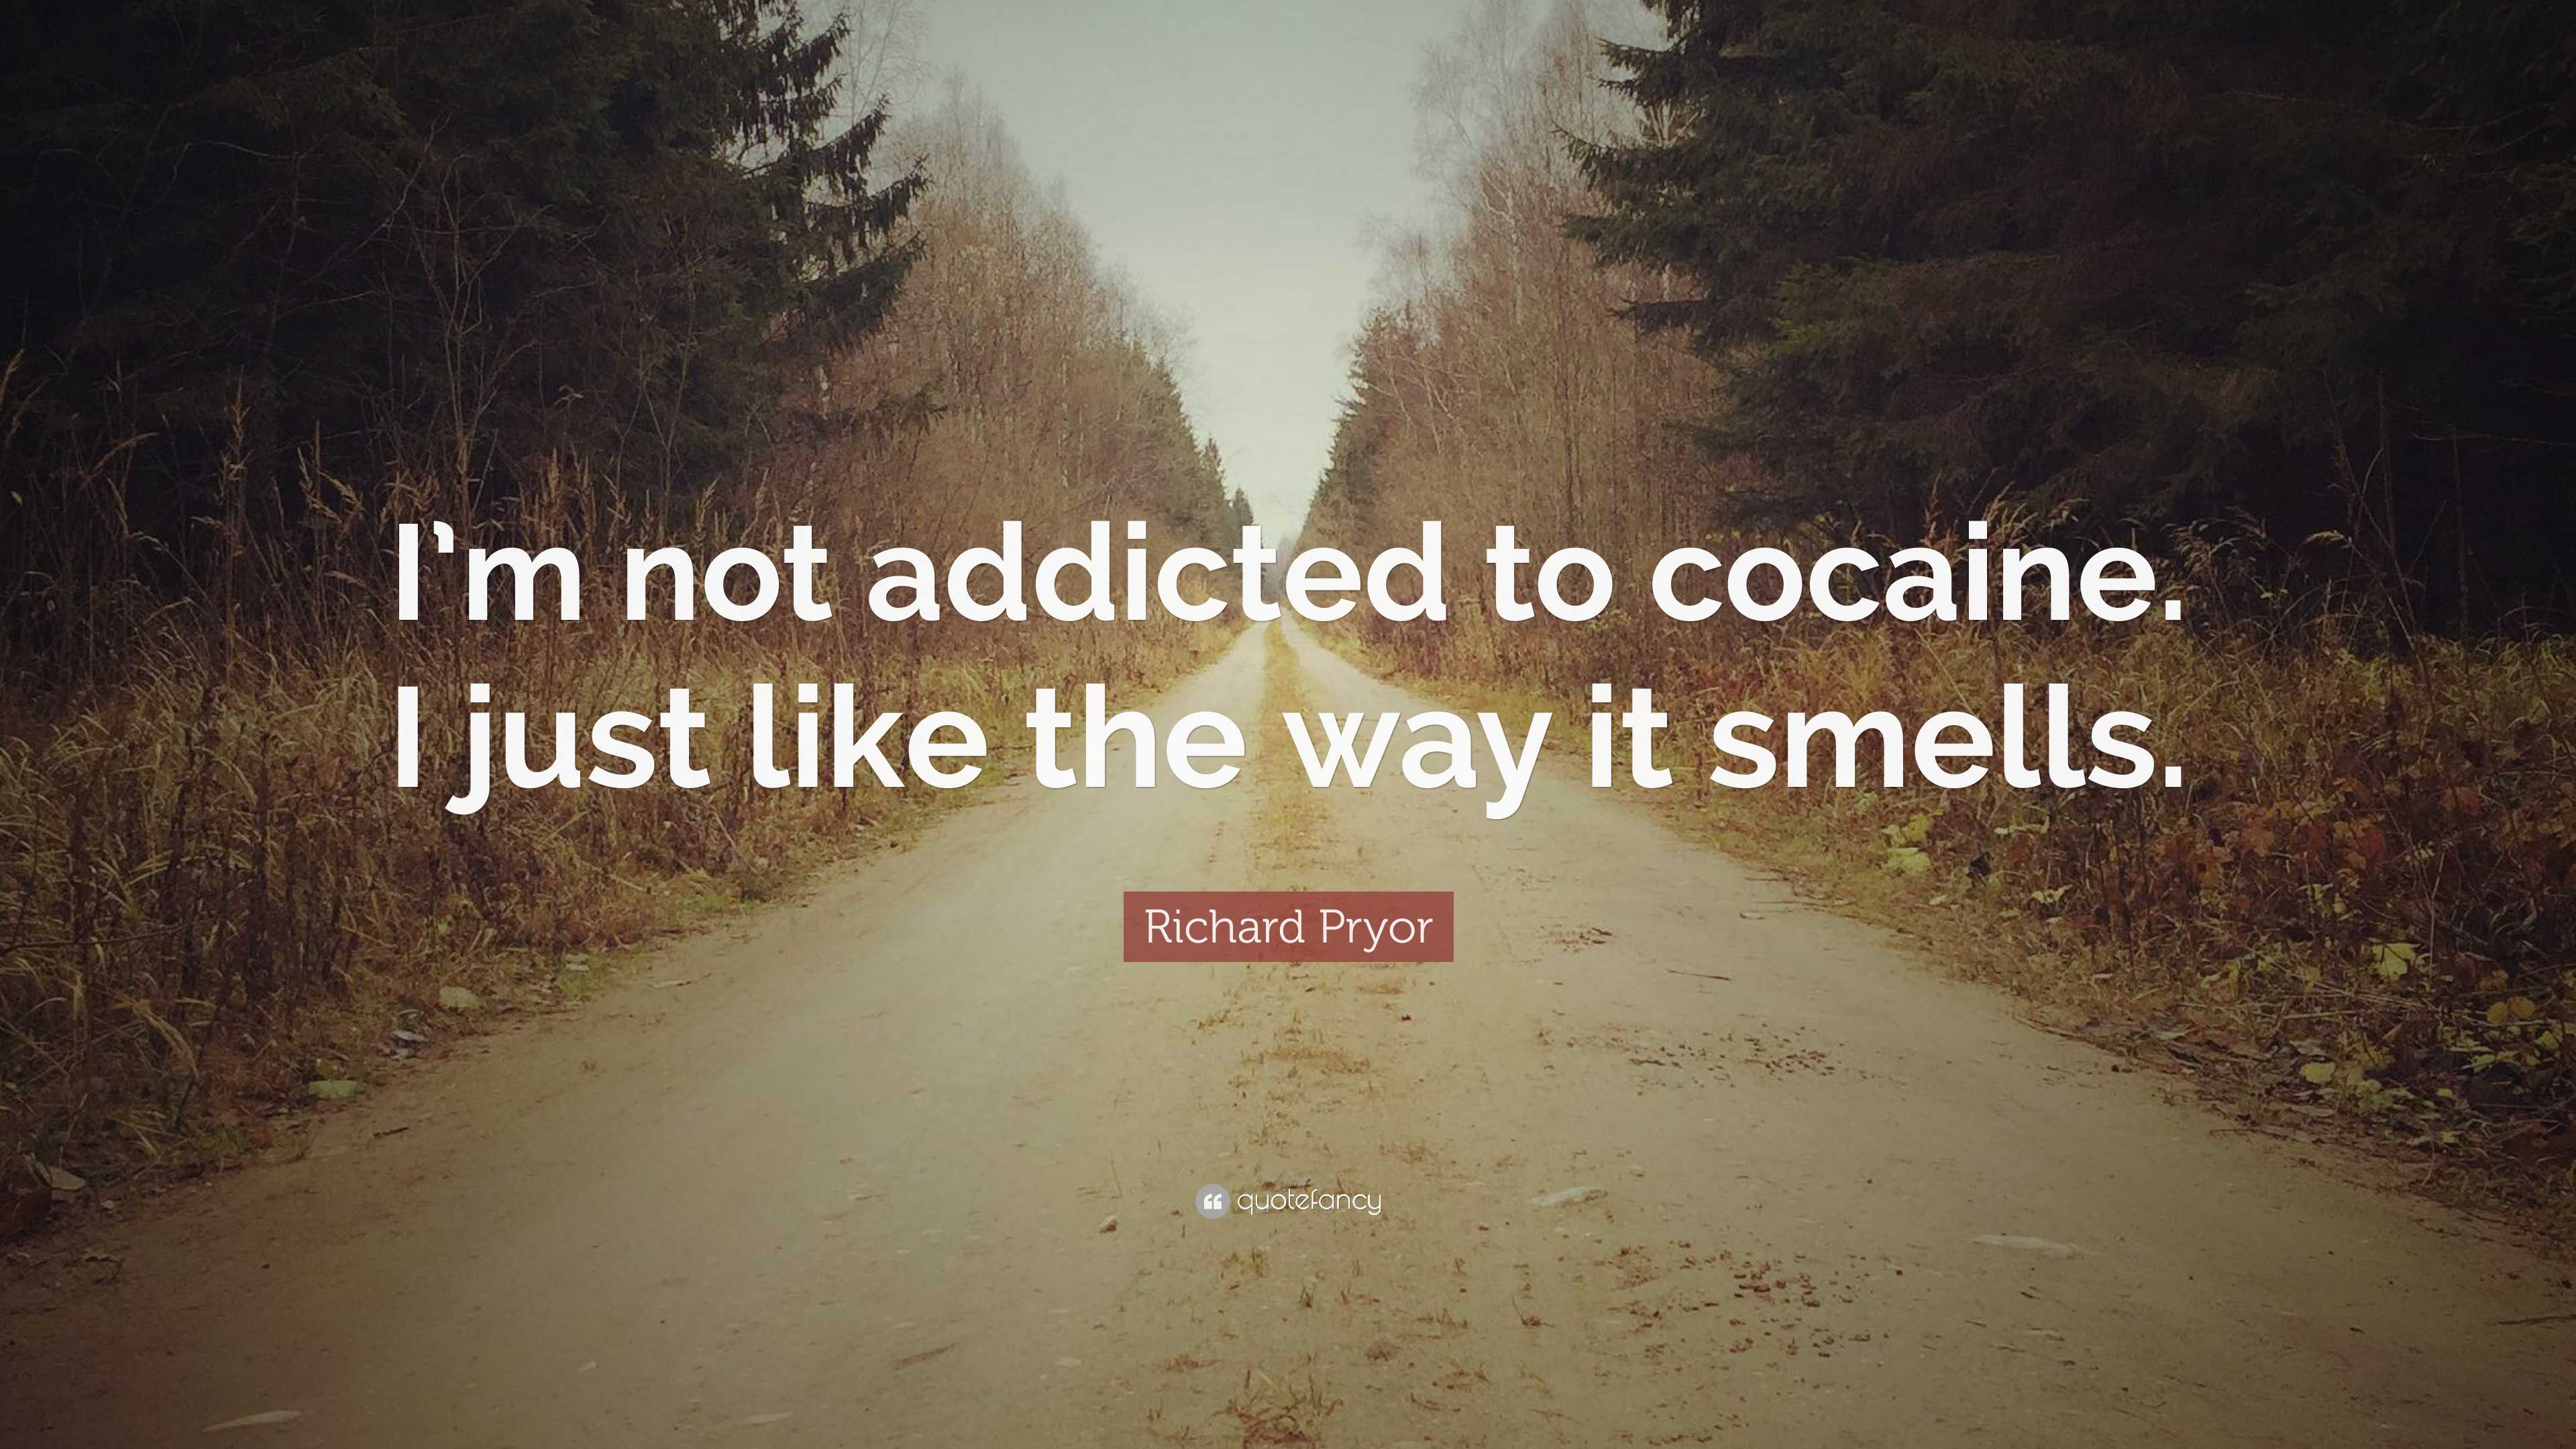 Richard Pryor Quote: “I’m not addicted to cocaine. I just like the way ...